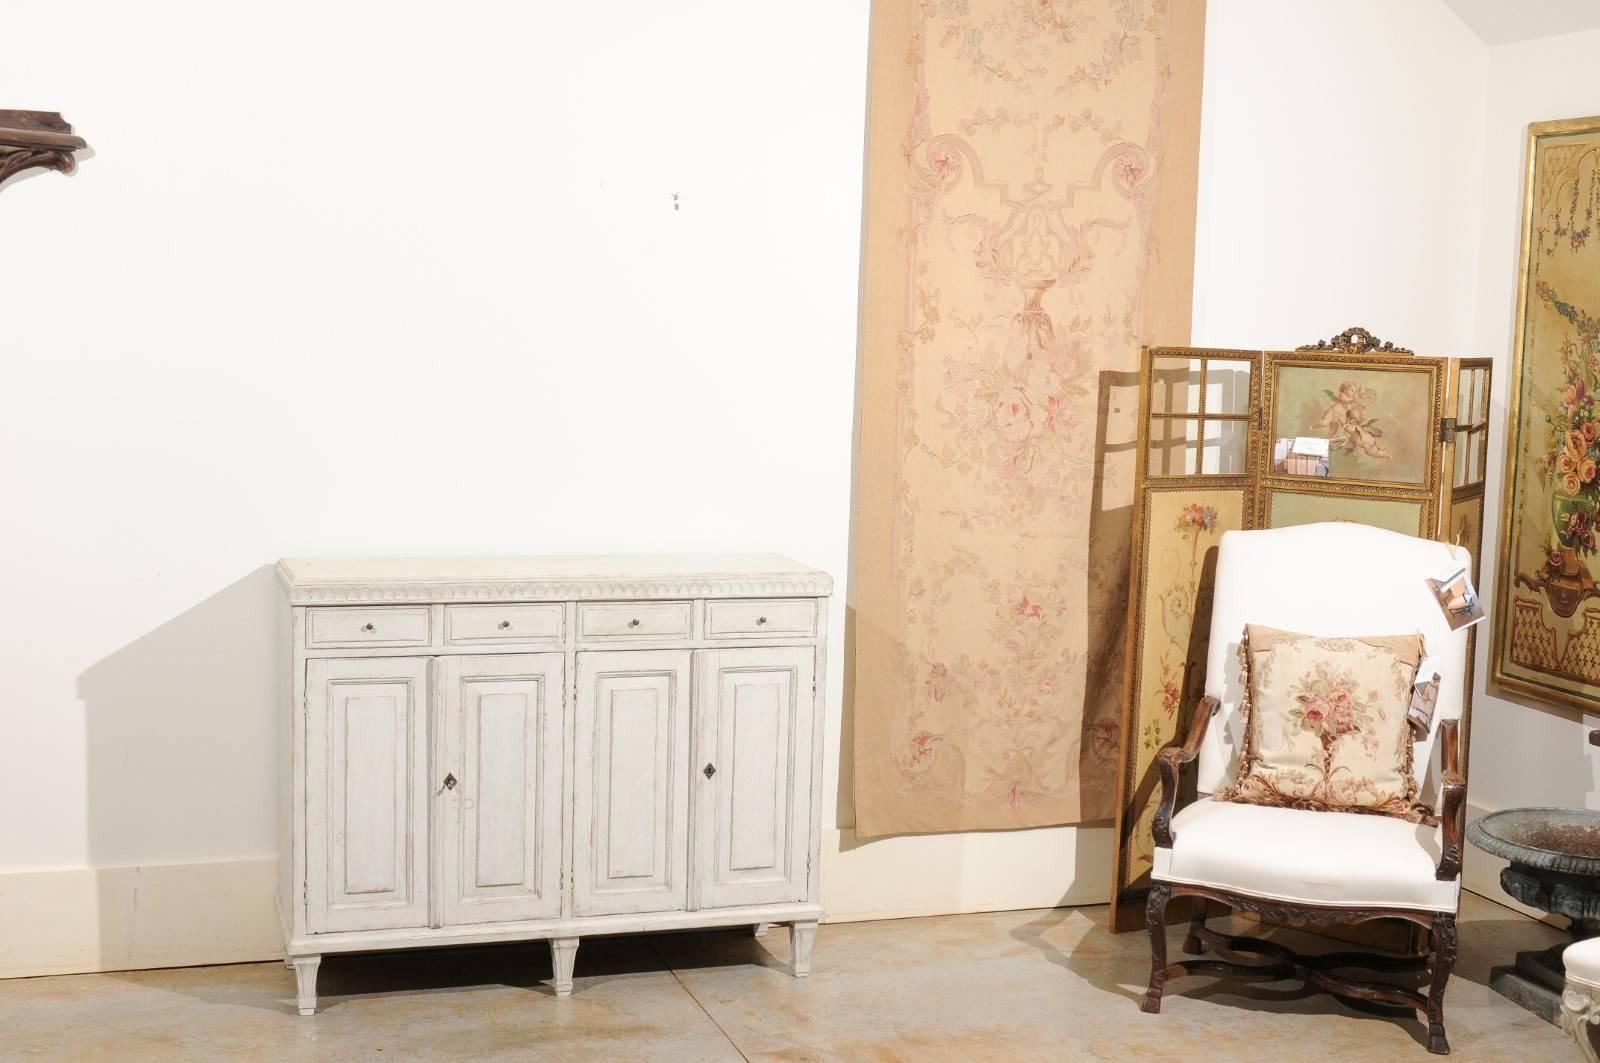 A Swedish Gustavian style late 19th century painted wood buffet from Stockholm with carved molding, four doors, four drawers and tapered feet. This exquisite Swedish buffet features a slightly raised, rectangular top, sitting above a carved molding